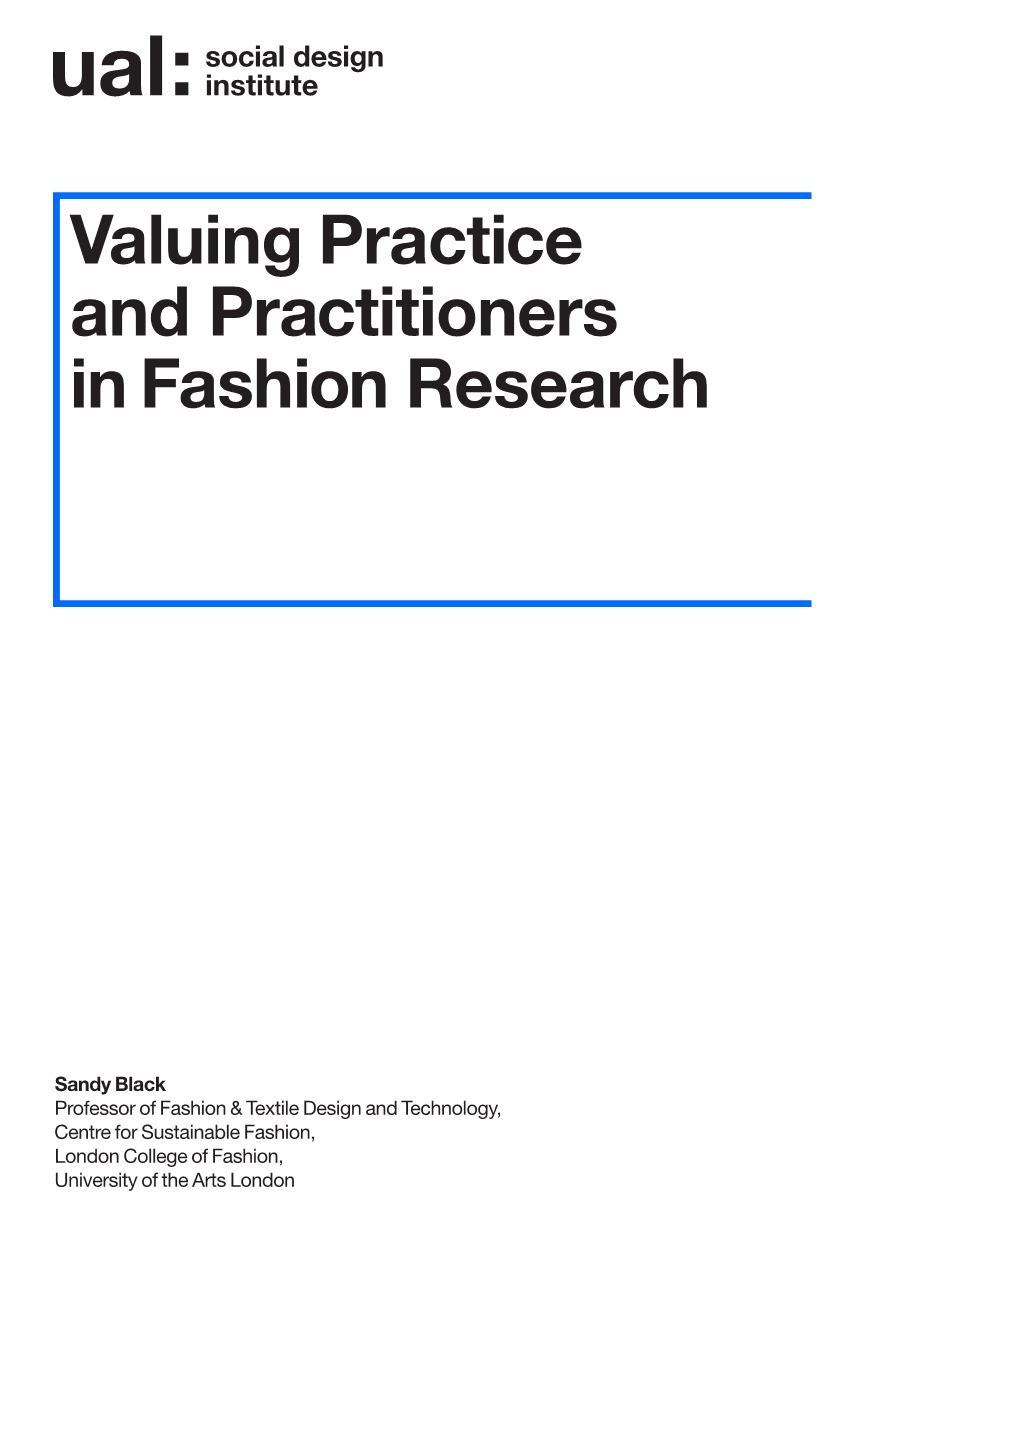 Valuing Practice and Practitioners in Fashion Research (PDF 388KB)